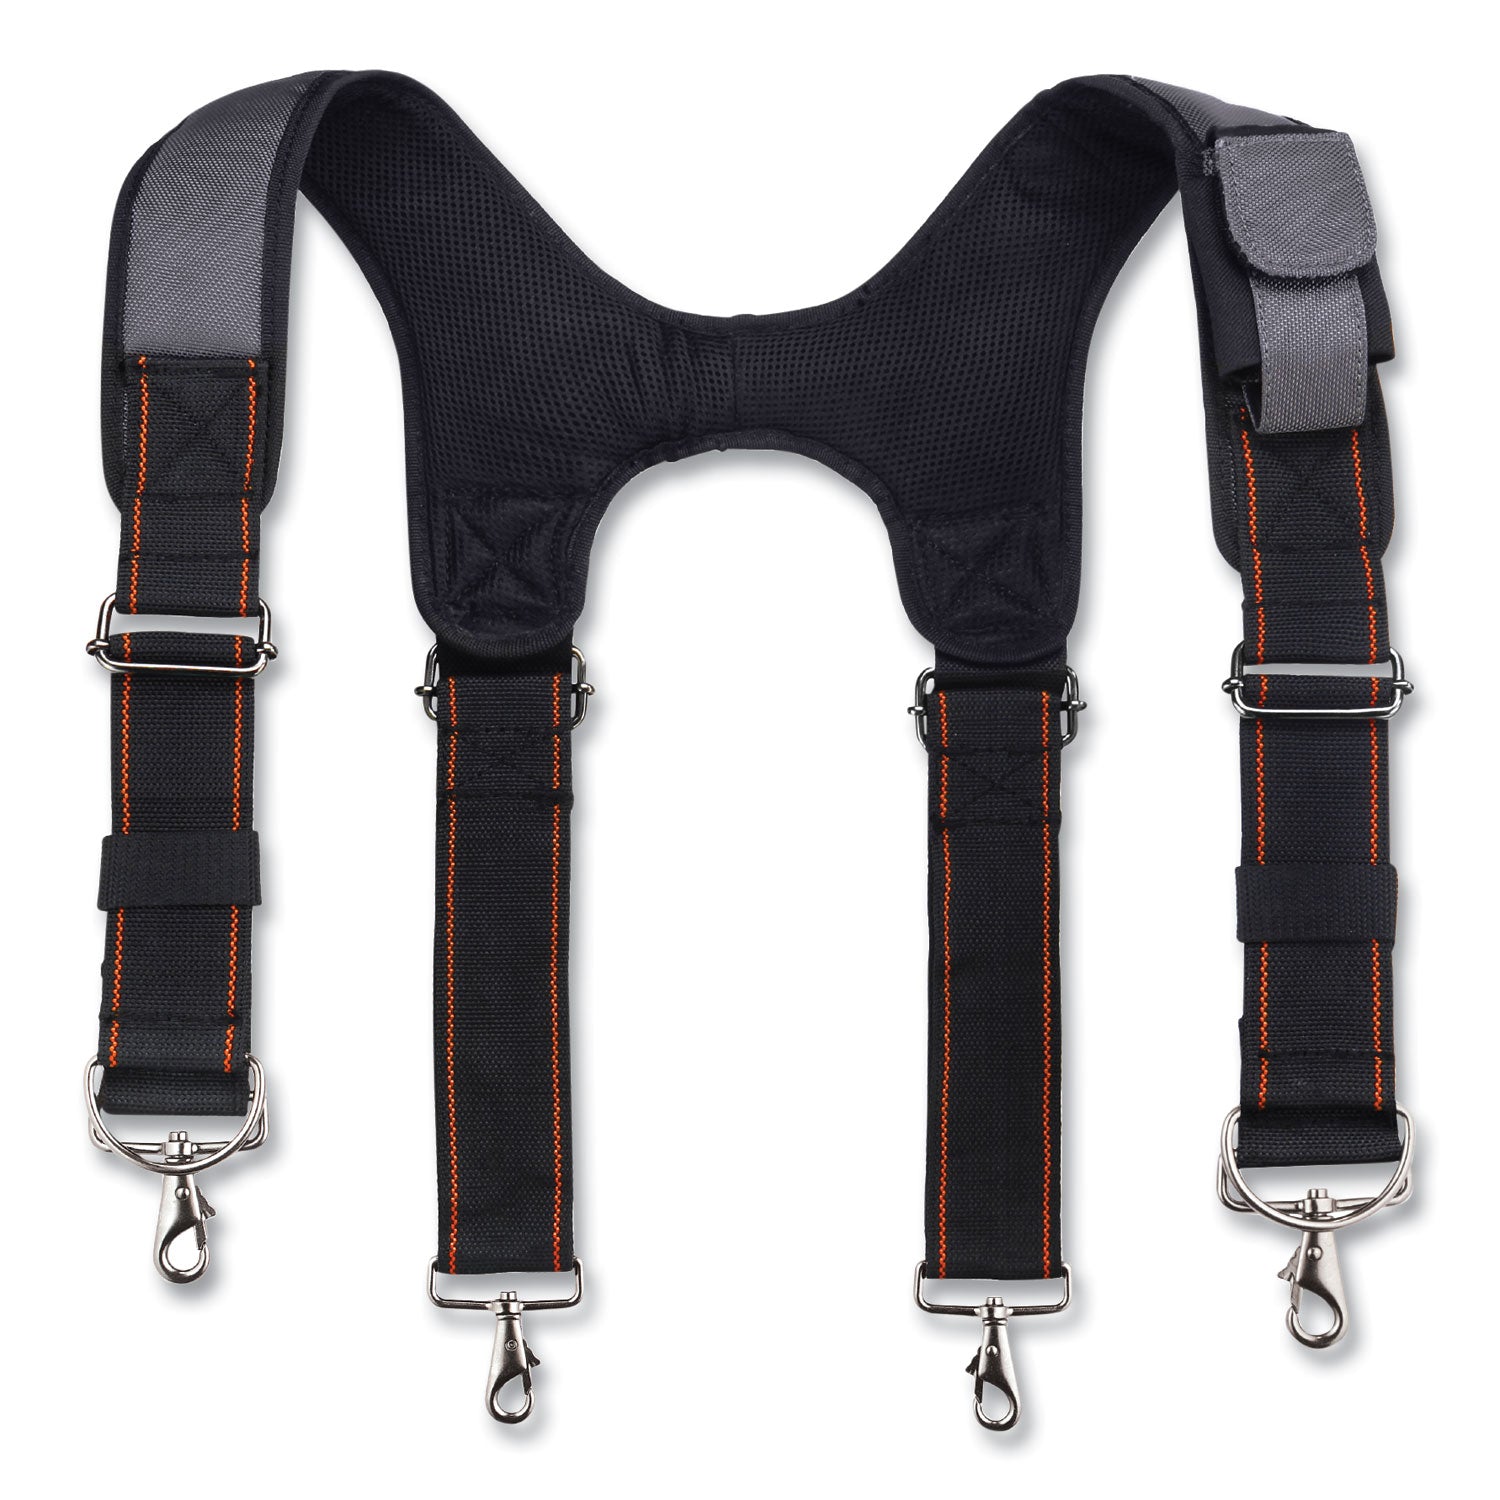 arsenal-5560-padded-tool-belt-suspenders-36-to-48-waist-3-wide-polyester-gray-ships-in-1-3-business-days_ego13665 - 1